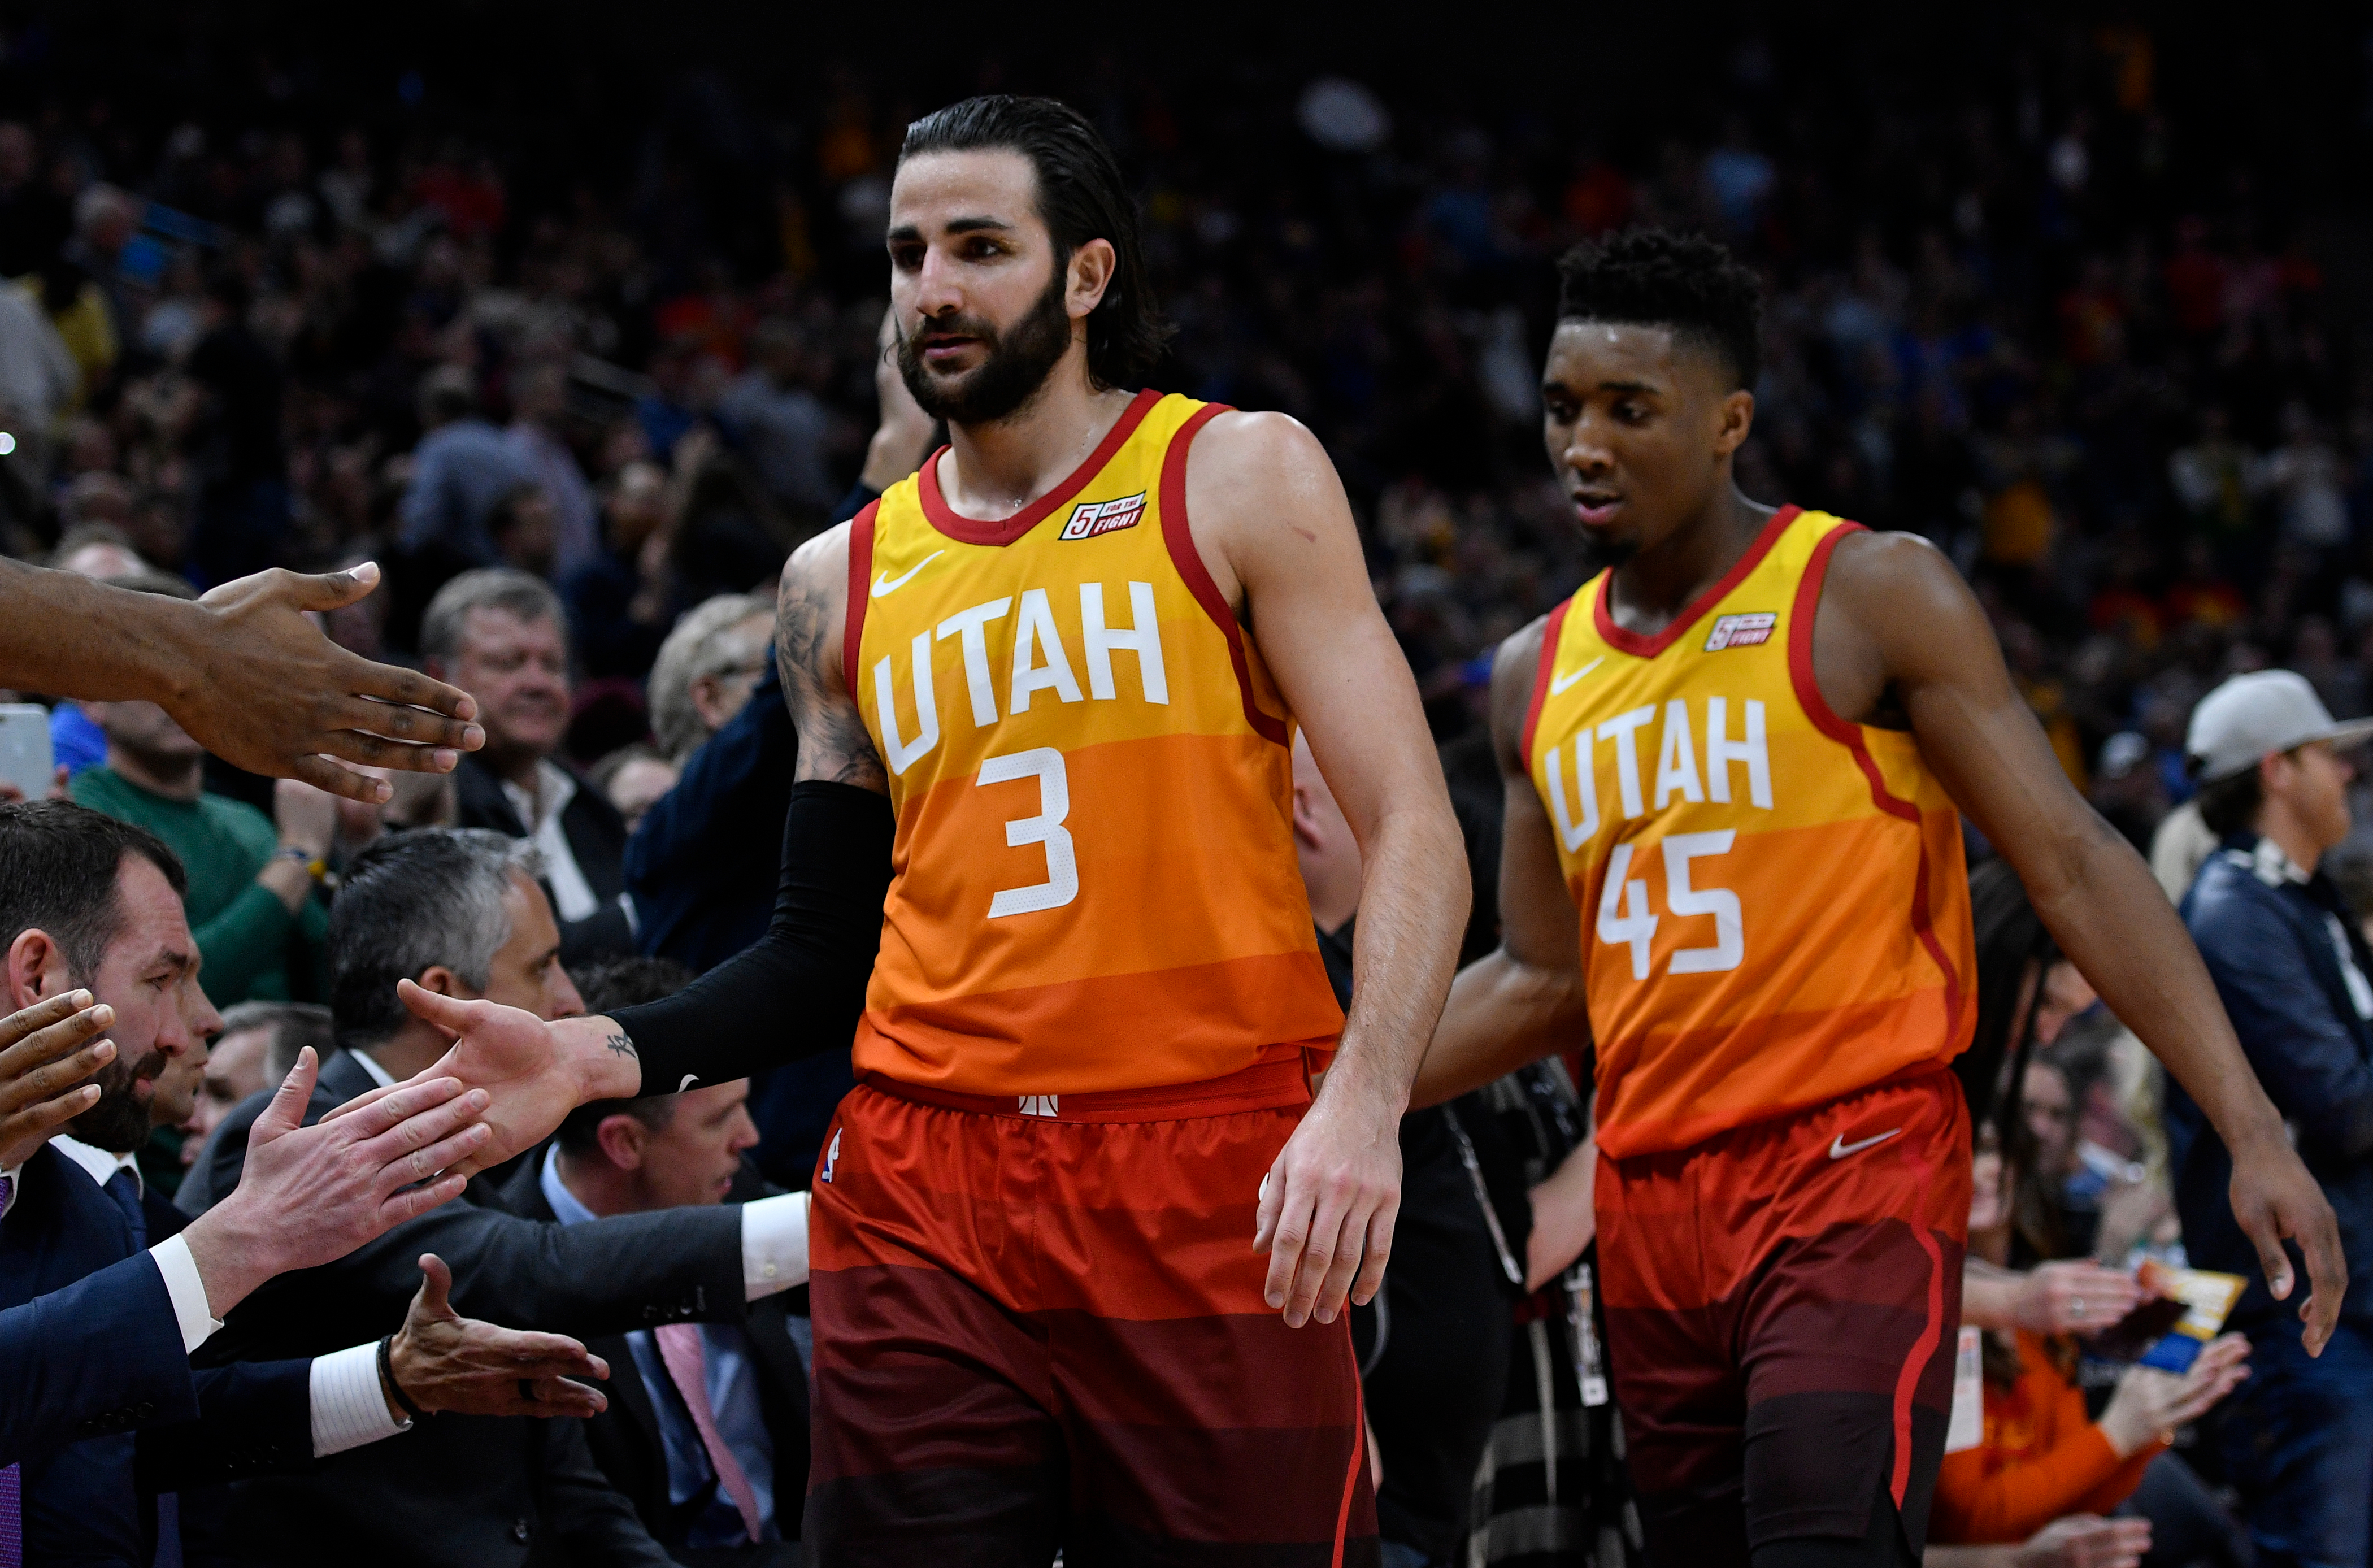 BREAKING: The @utahjazz are closing in on a deal to make